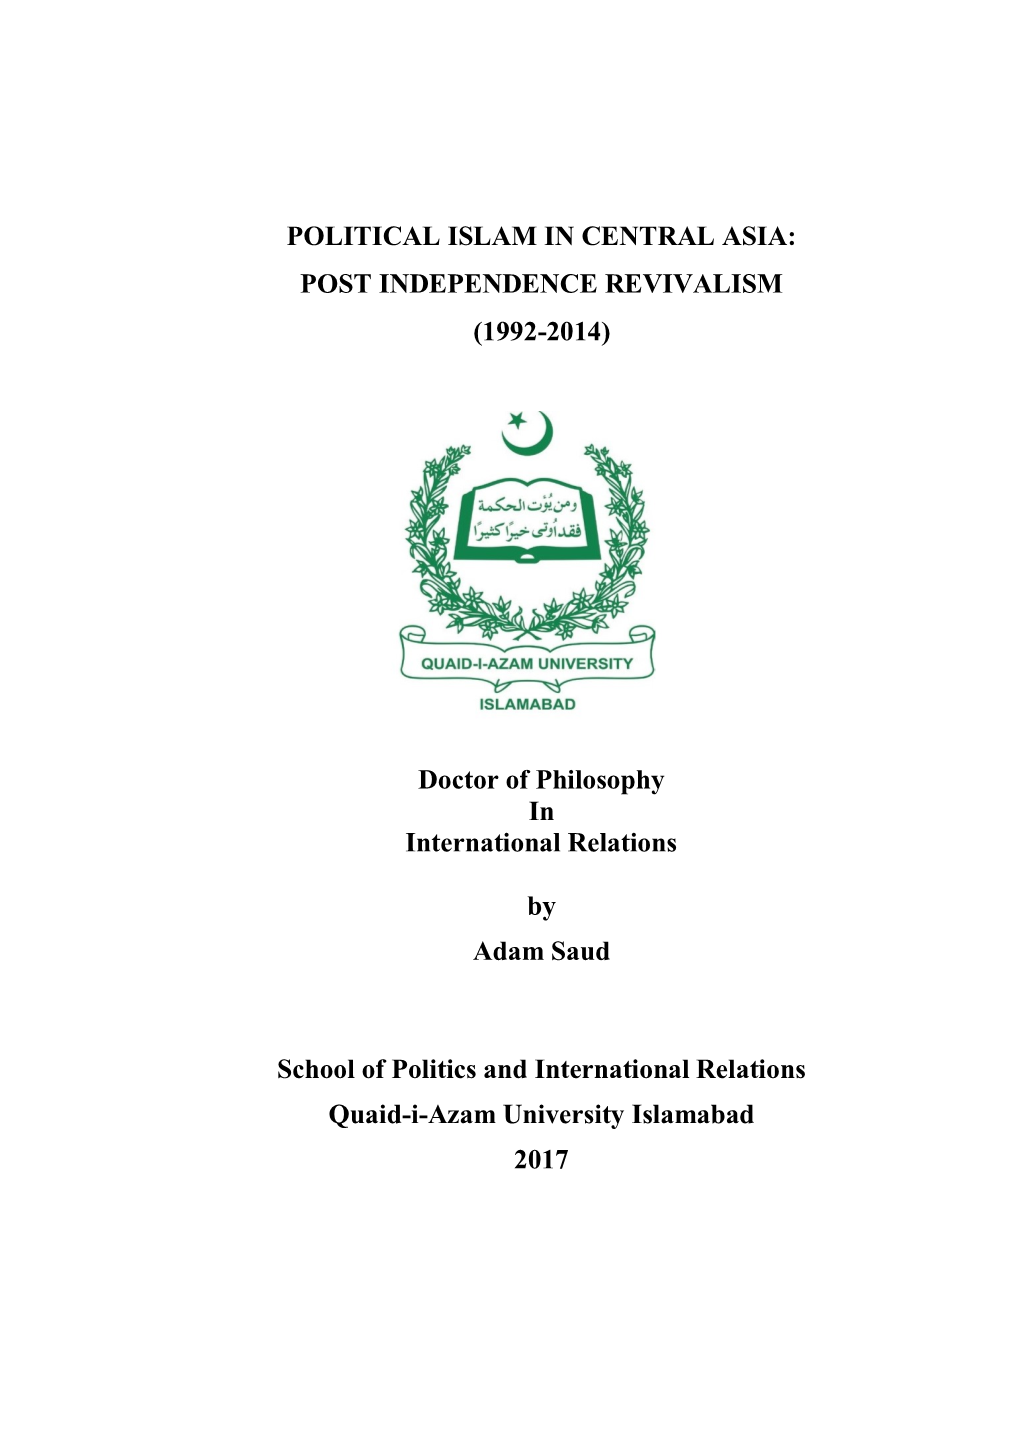 Political Islam in Central Asia: Post Independence Revivalism (1992-2014)